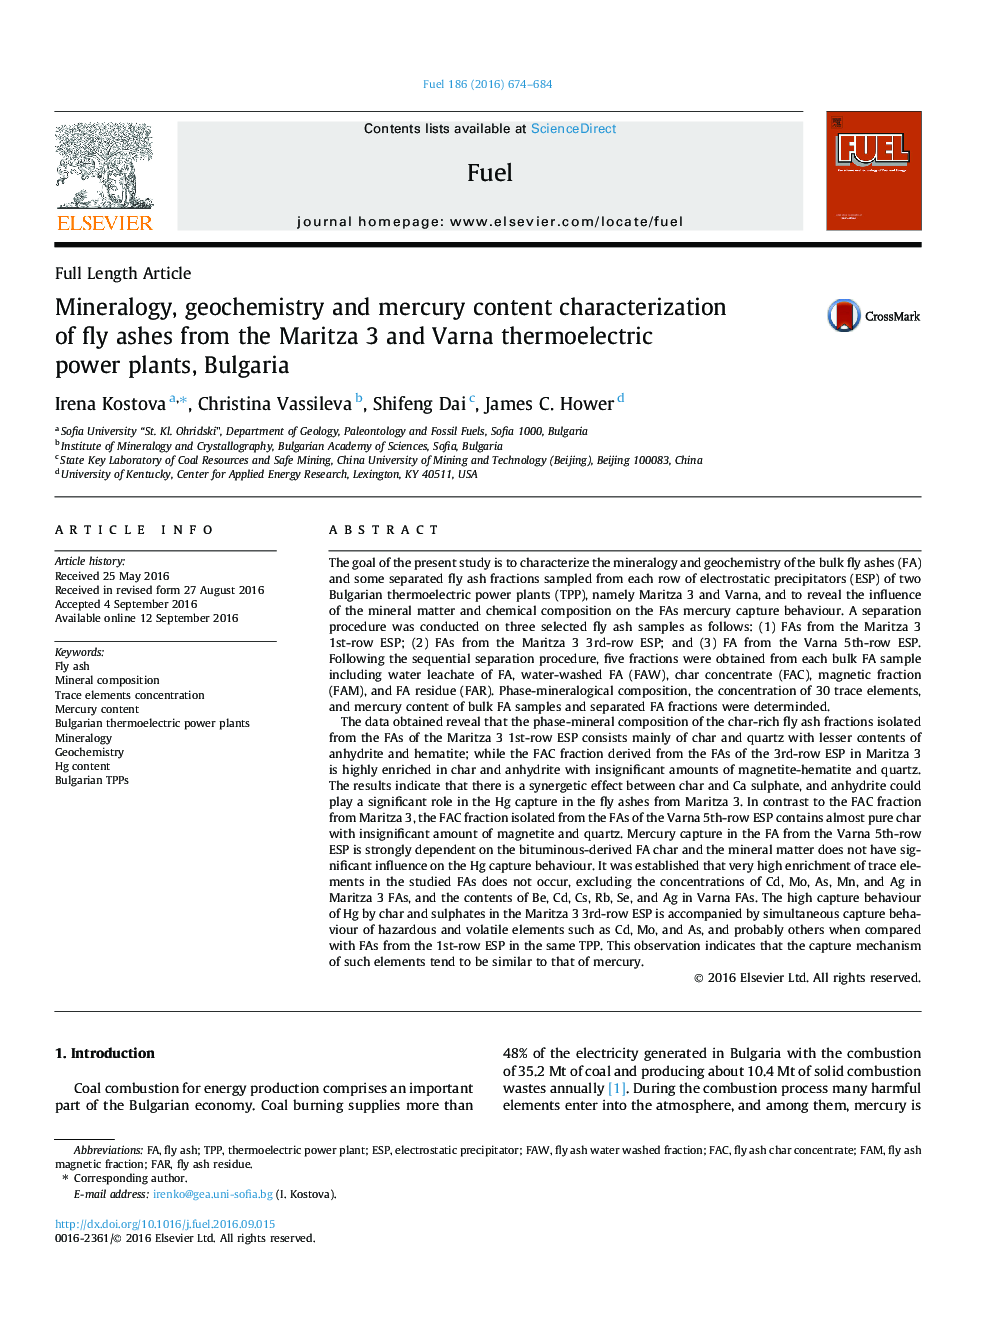 Mineralogy, geochemistry and mercury content characterization of fly ashes from the Maritza 3 and Varna thermoelectric power plants, Bulgaria